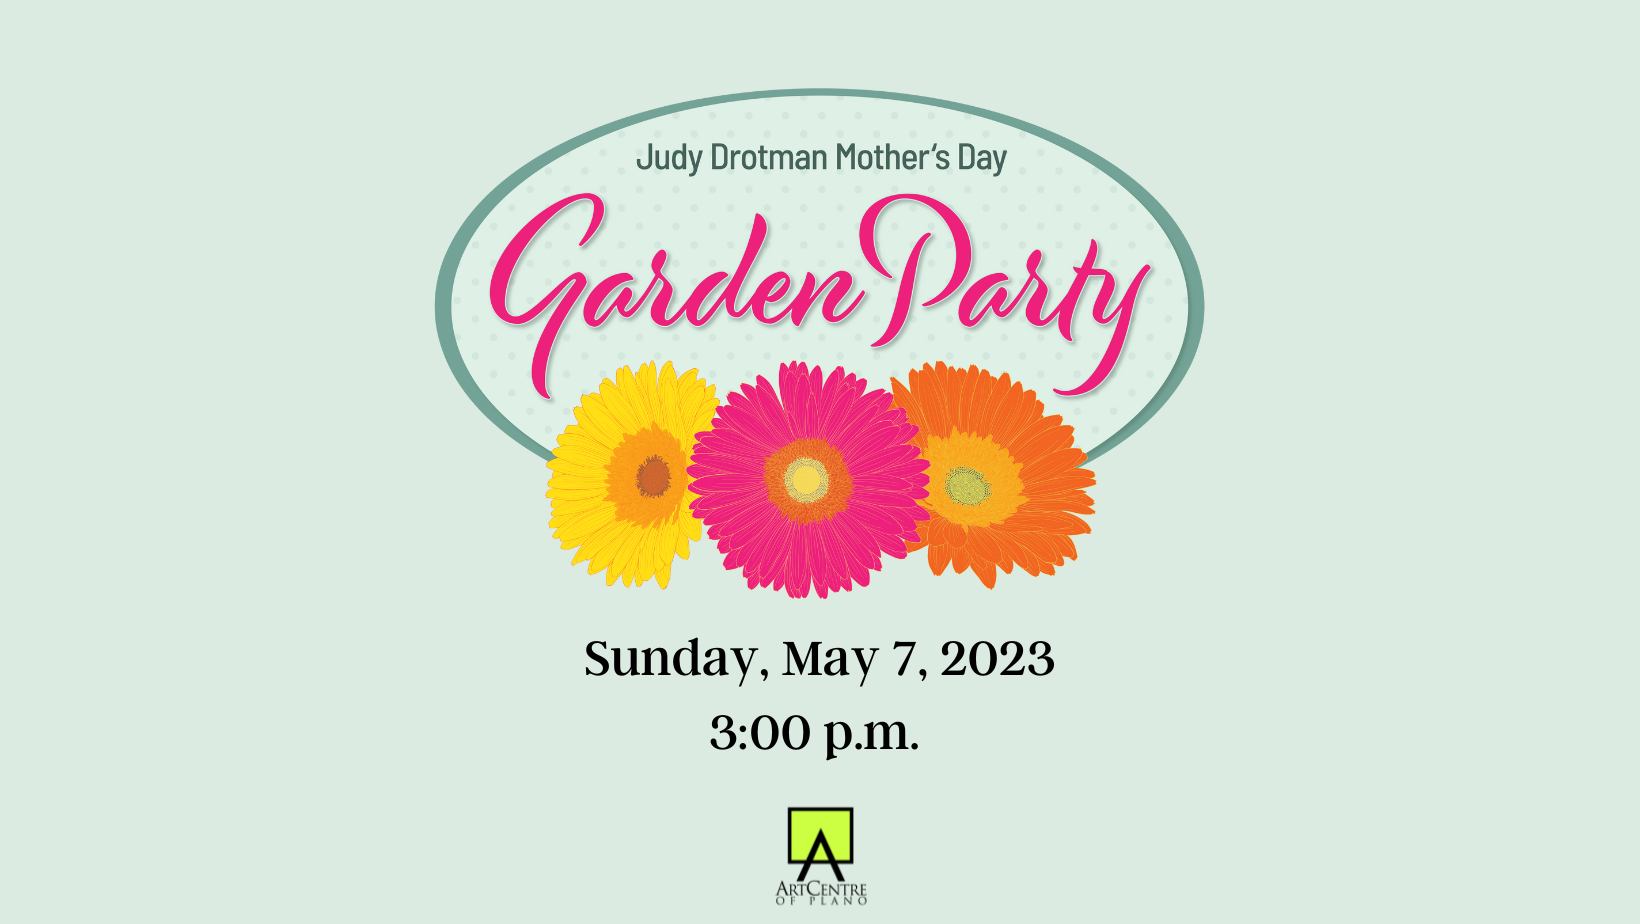 Judy Drotman Mothers Day Garden Party FB Image